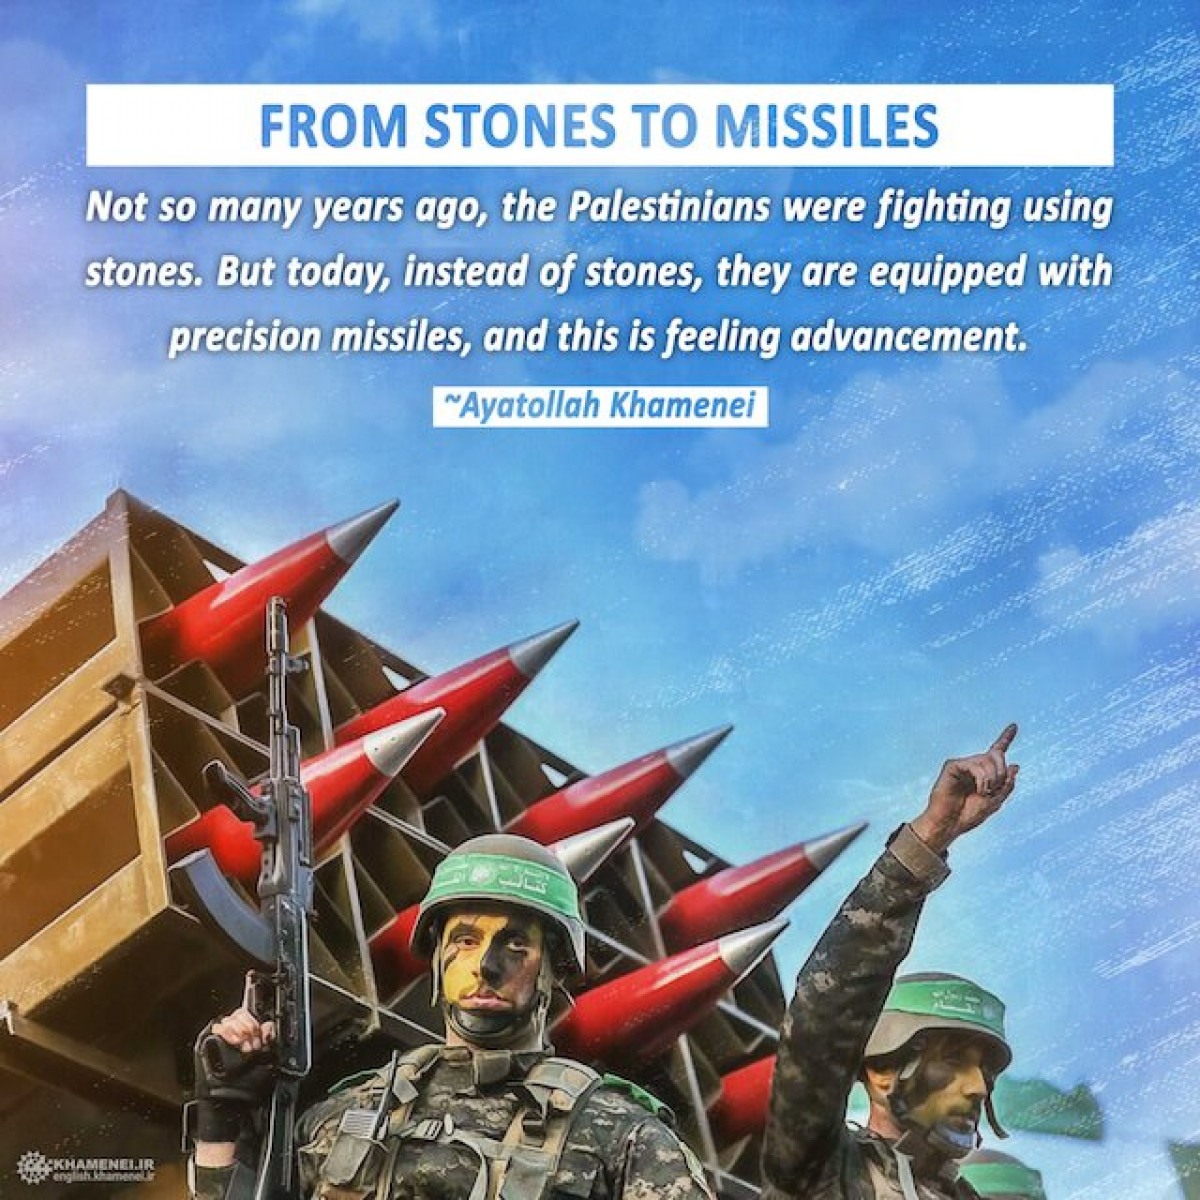 From stones to missiles